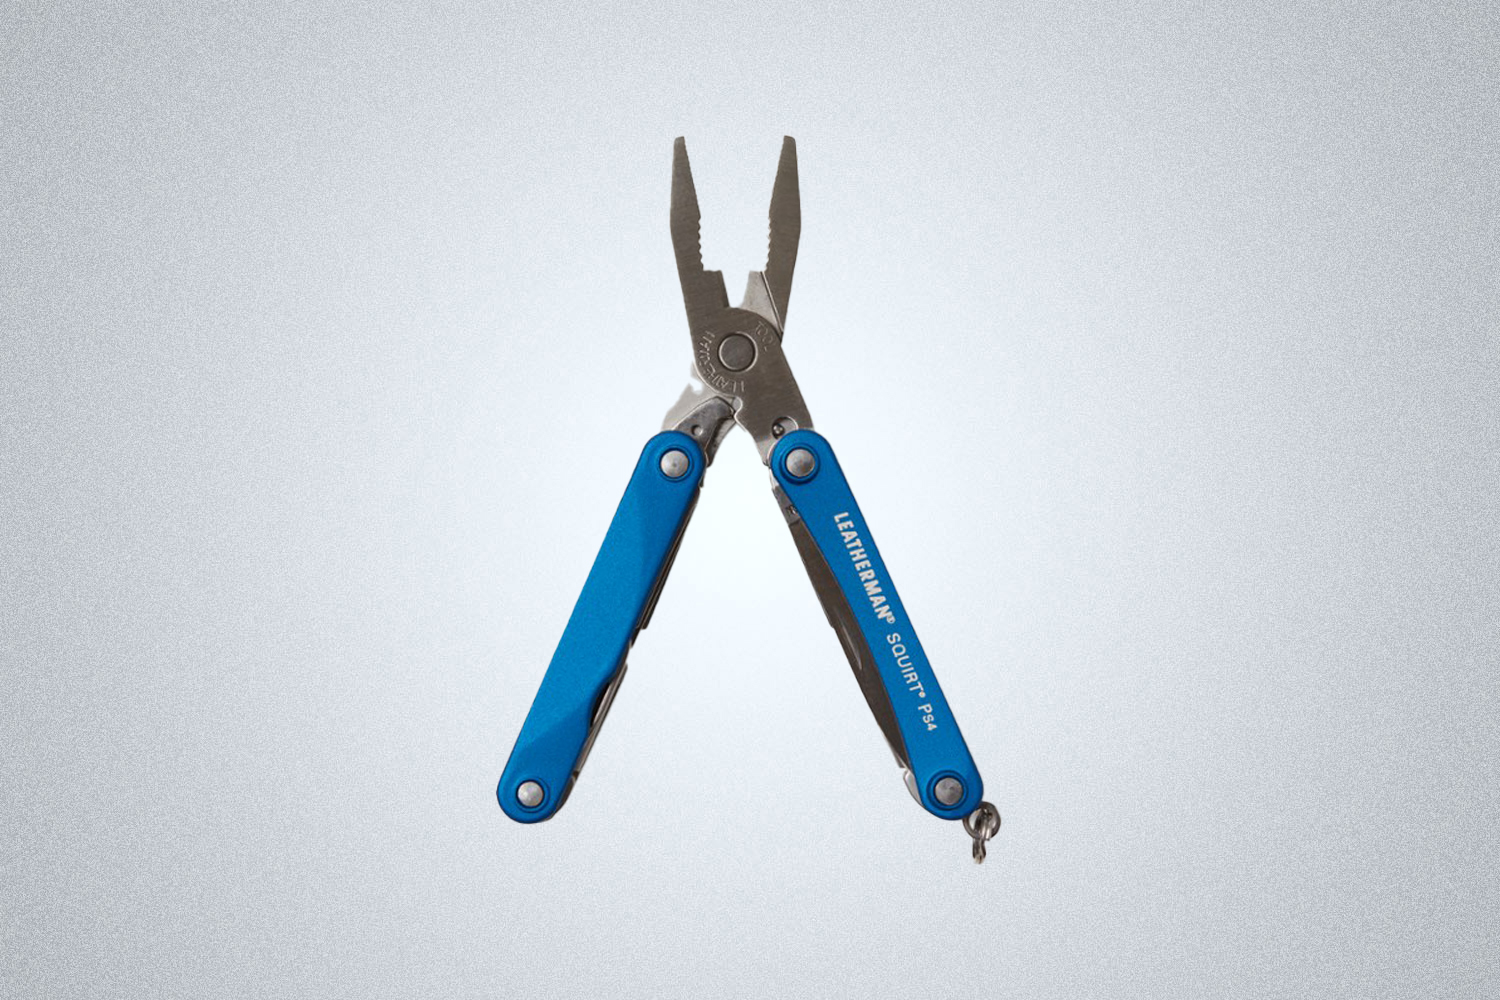 The Leatherman Squirt PS4 Multi-Tool is perfect for car emergencies and winter troubles when last-minute repairs are needed in 2022